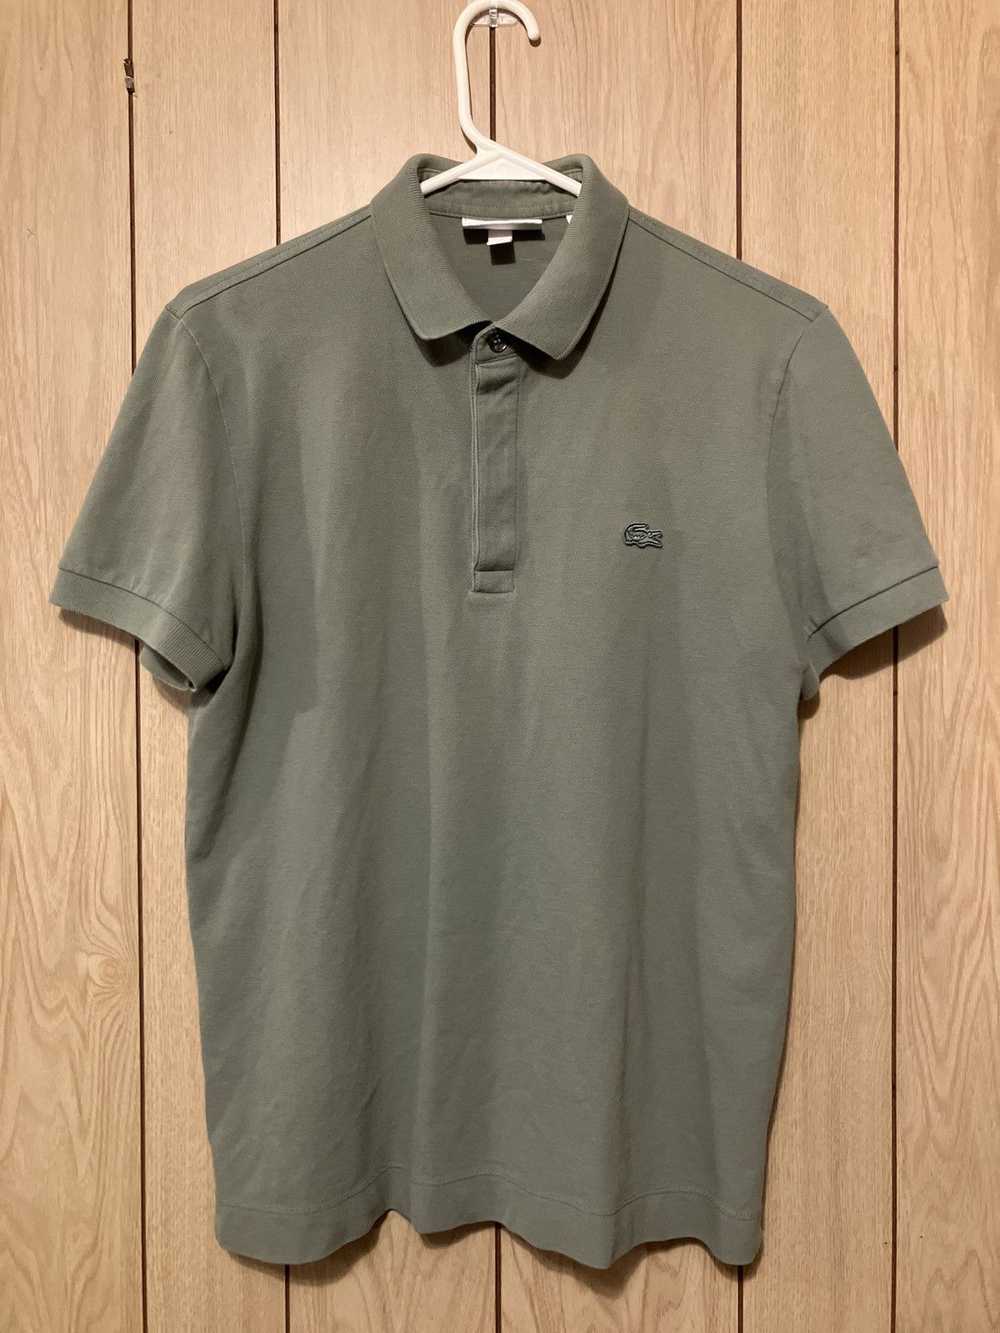 Lacoste Lacoste Polo Shirt. Small - image 8